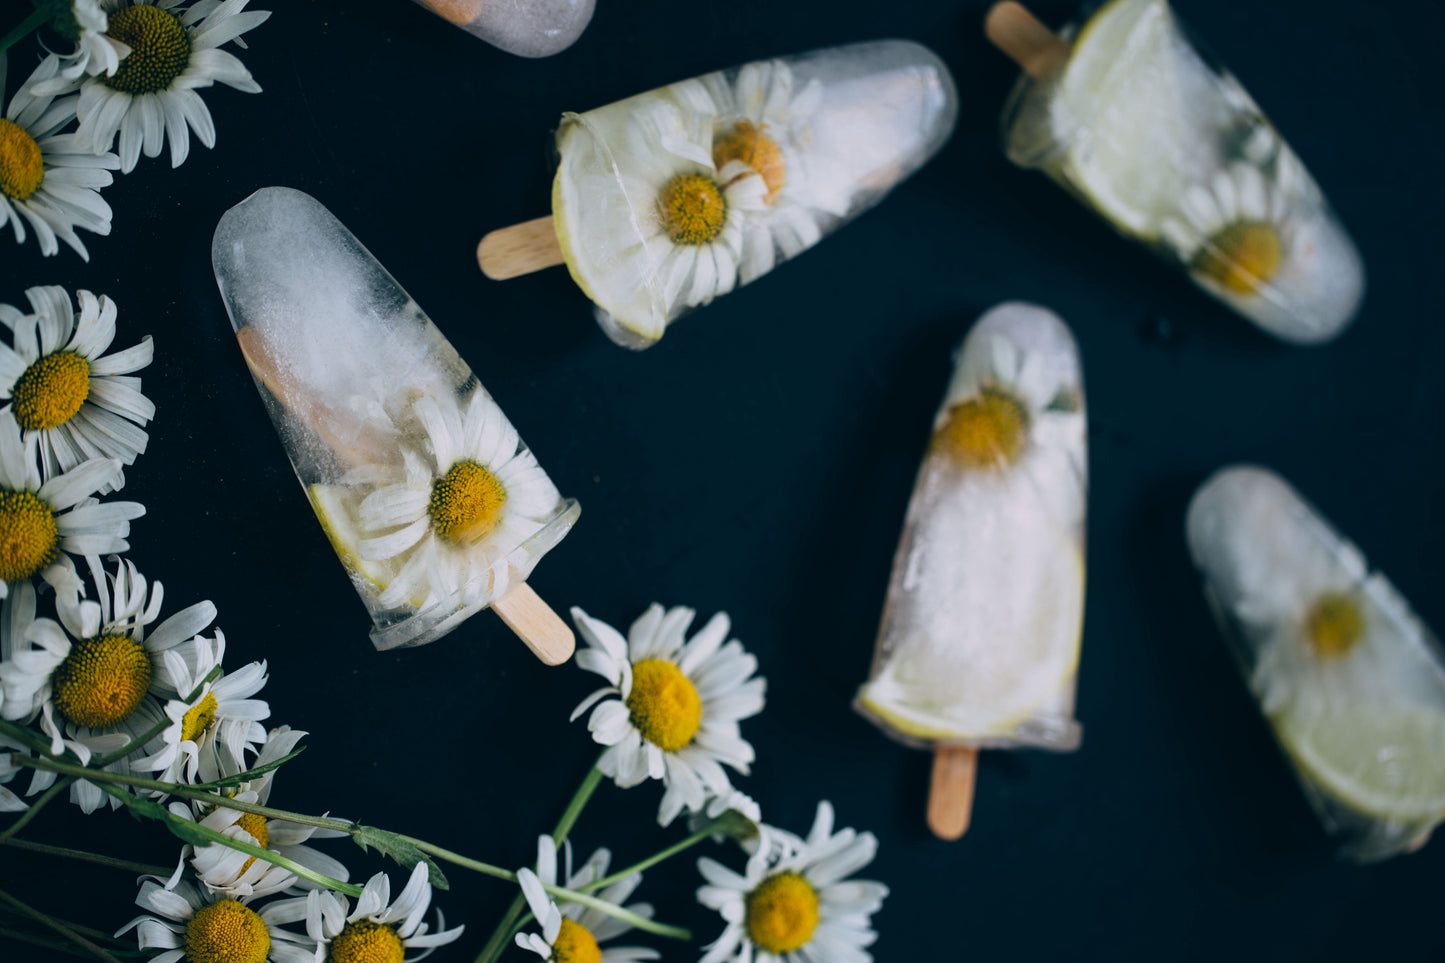 Agave Chamomile Popsicles - Sweet and Refreshing